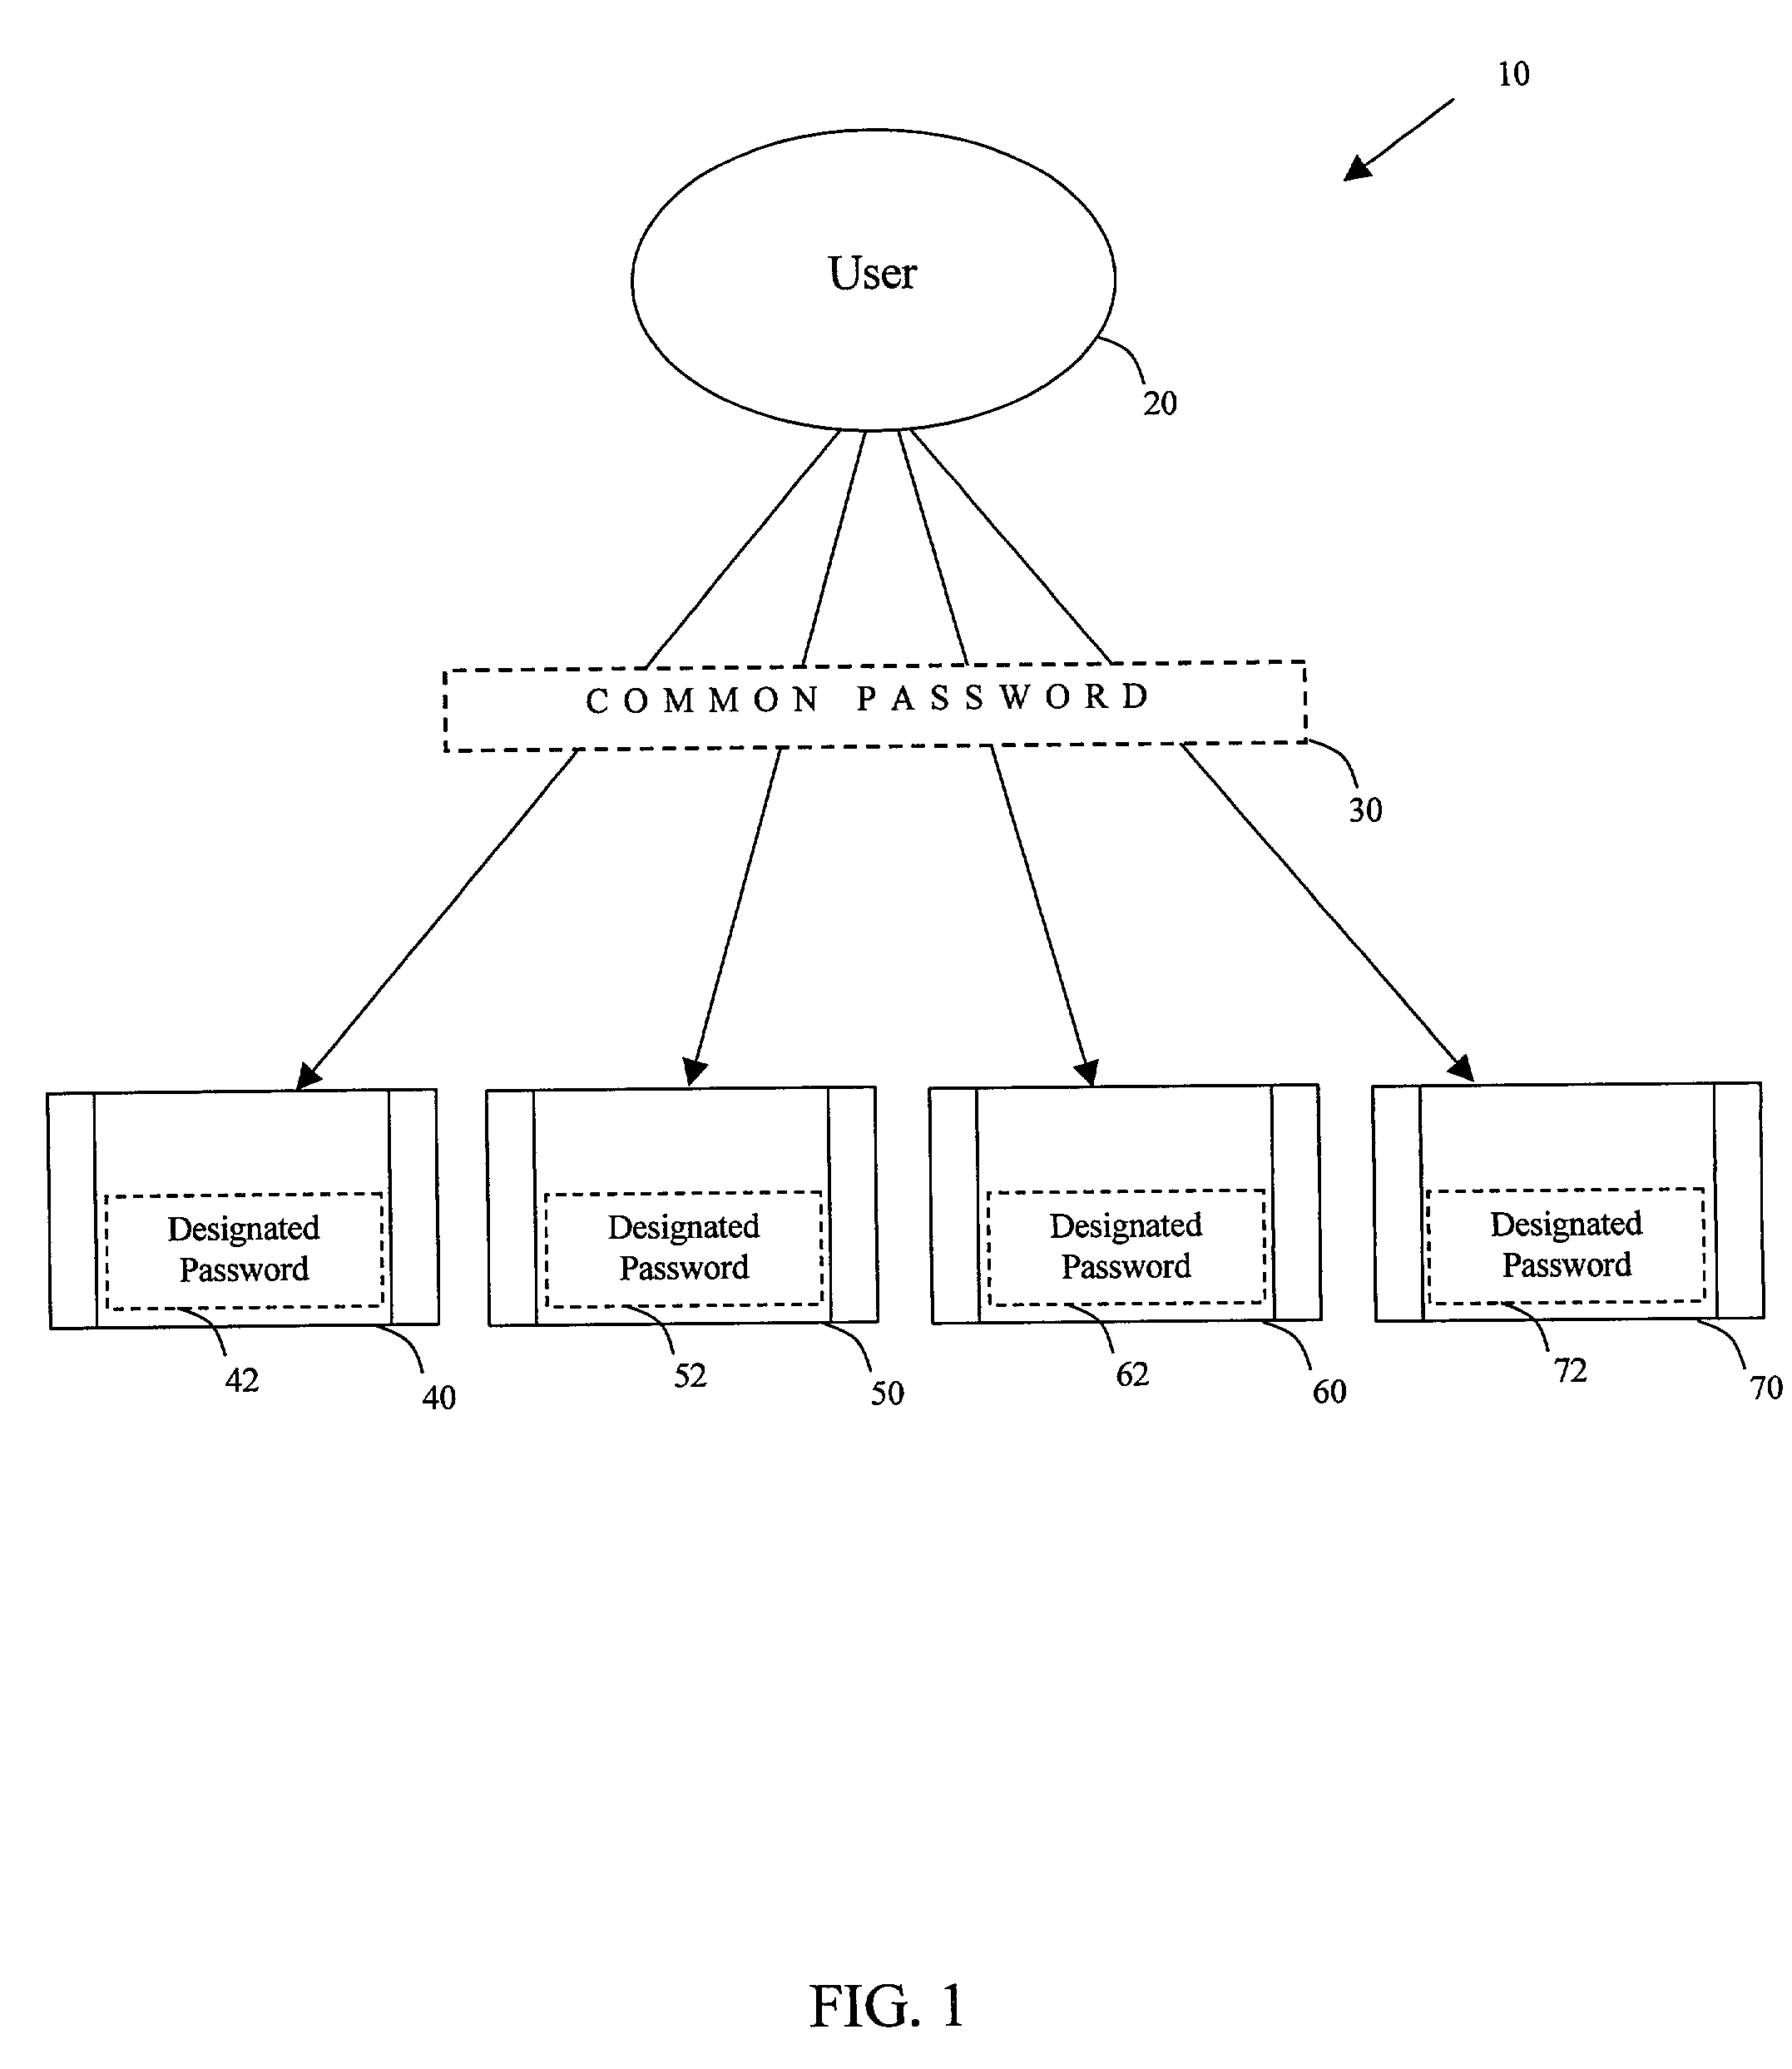 System and method for providing access to multiple user accounts via a common password